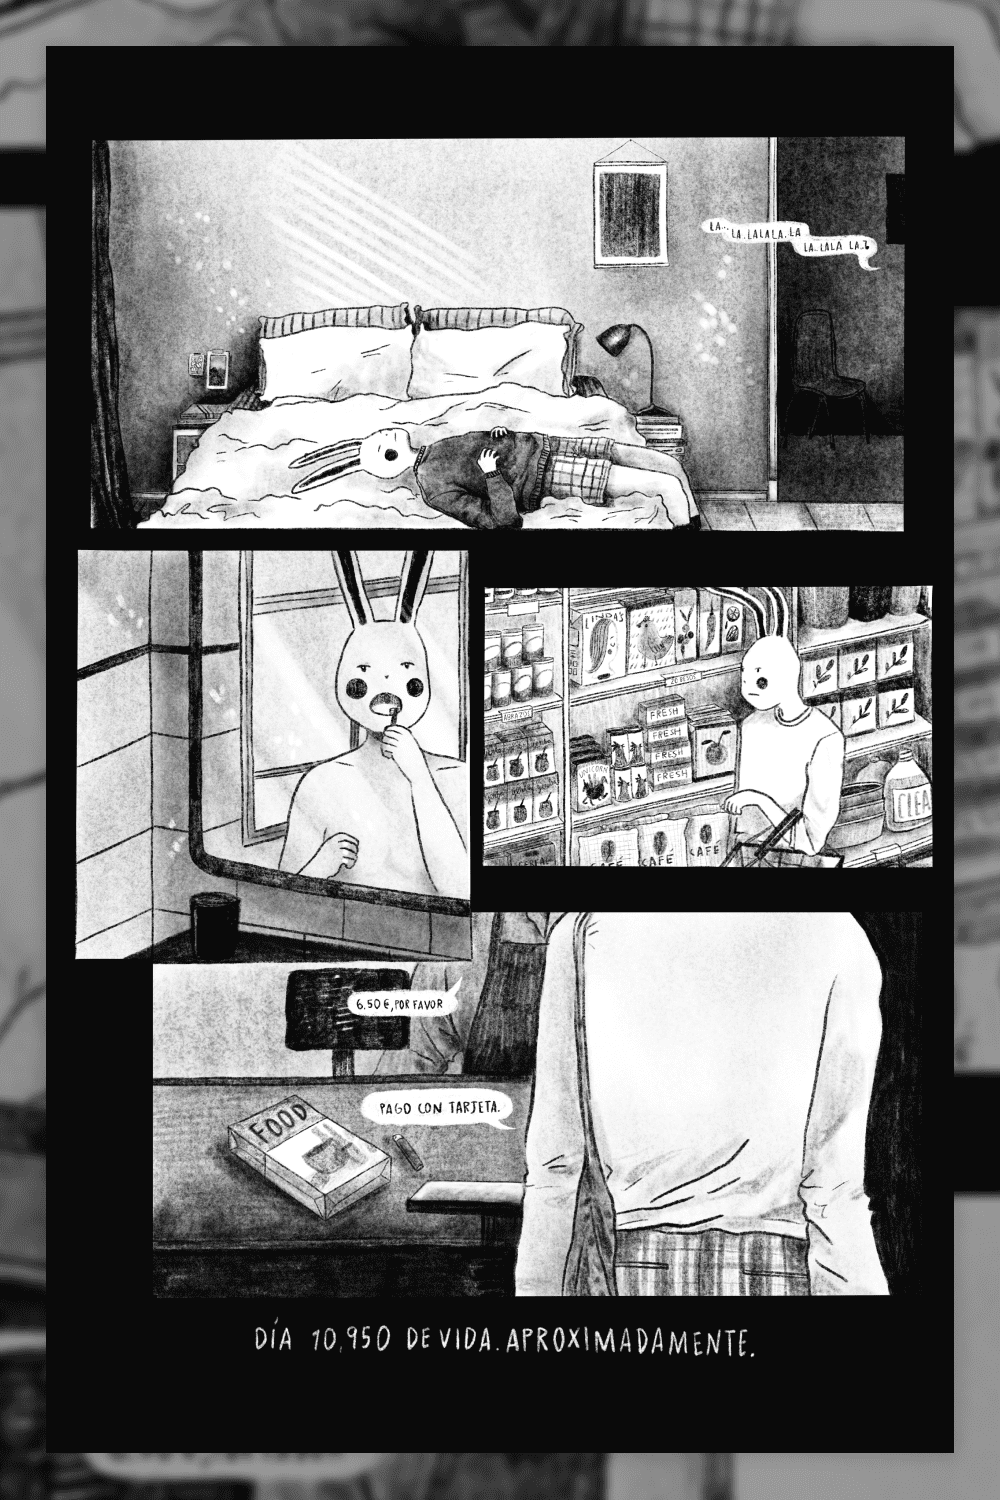 Collage with drawings of rabbit's life.